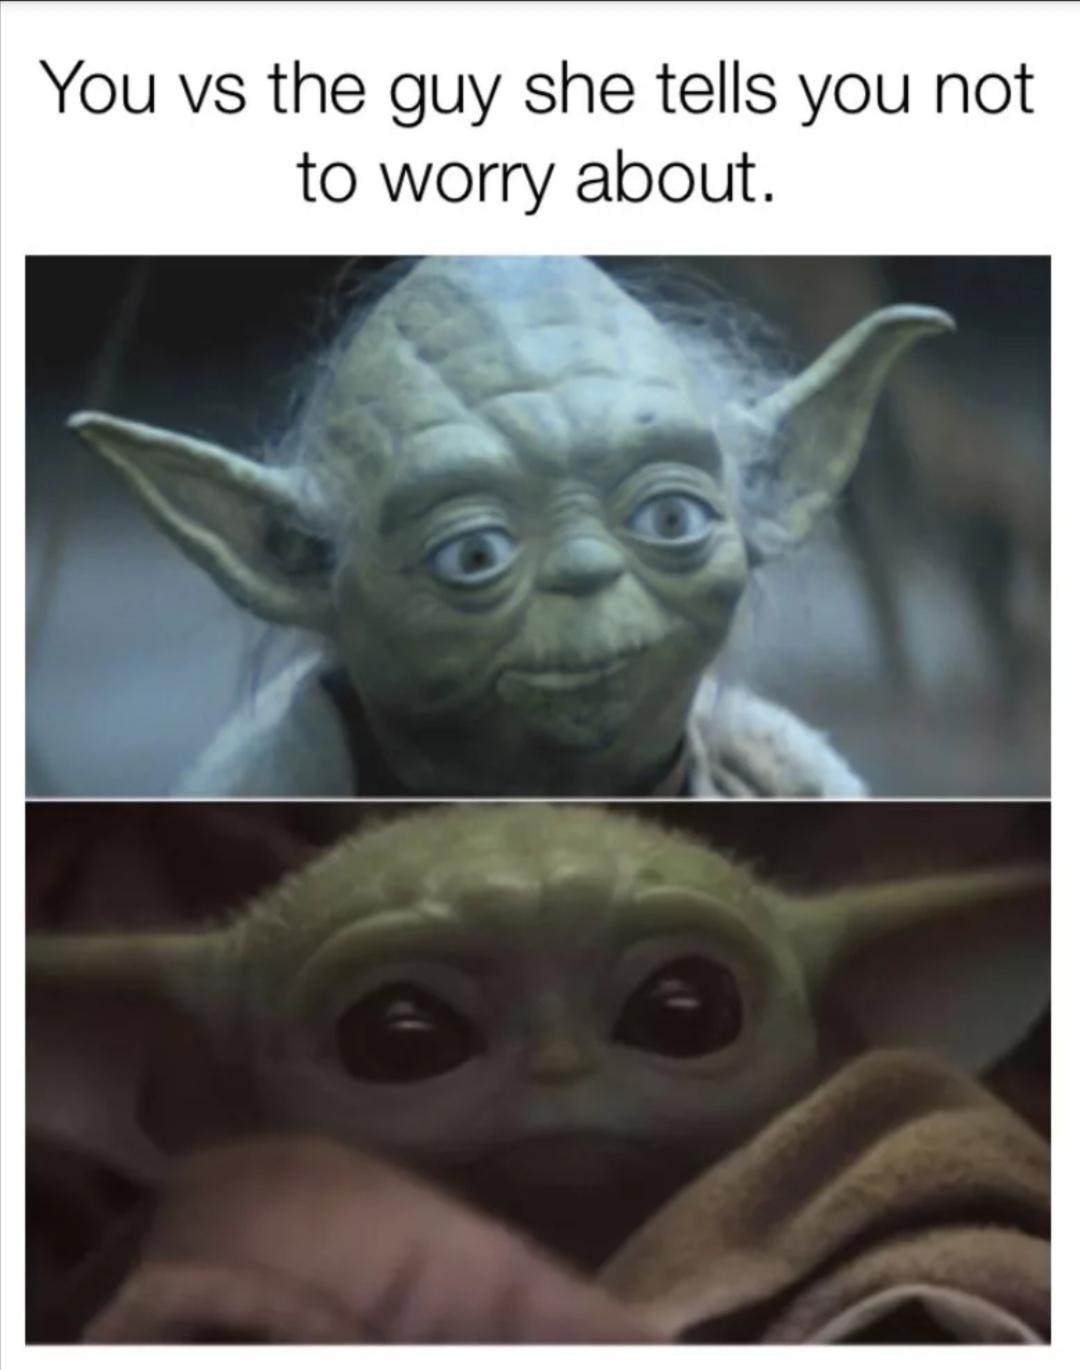 baby yoda meme - You vs the guy she tells you not to worry about